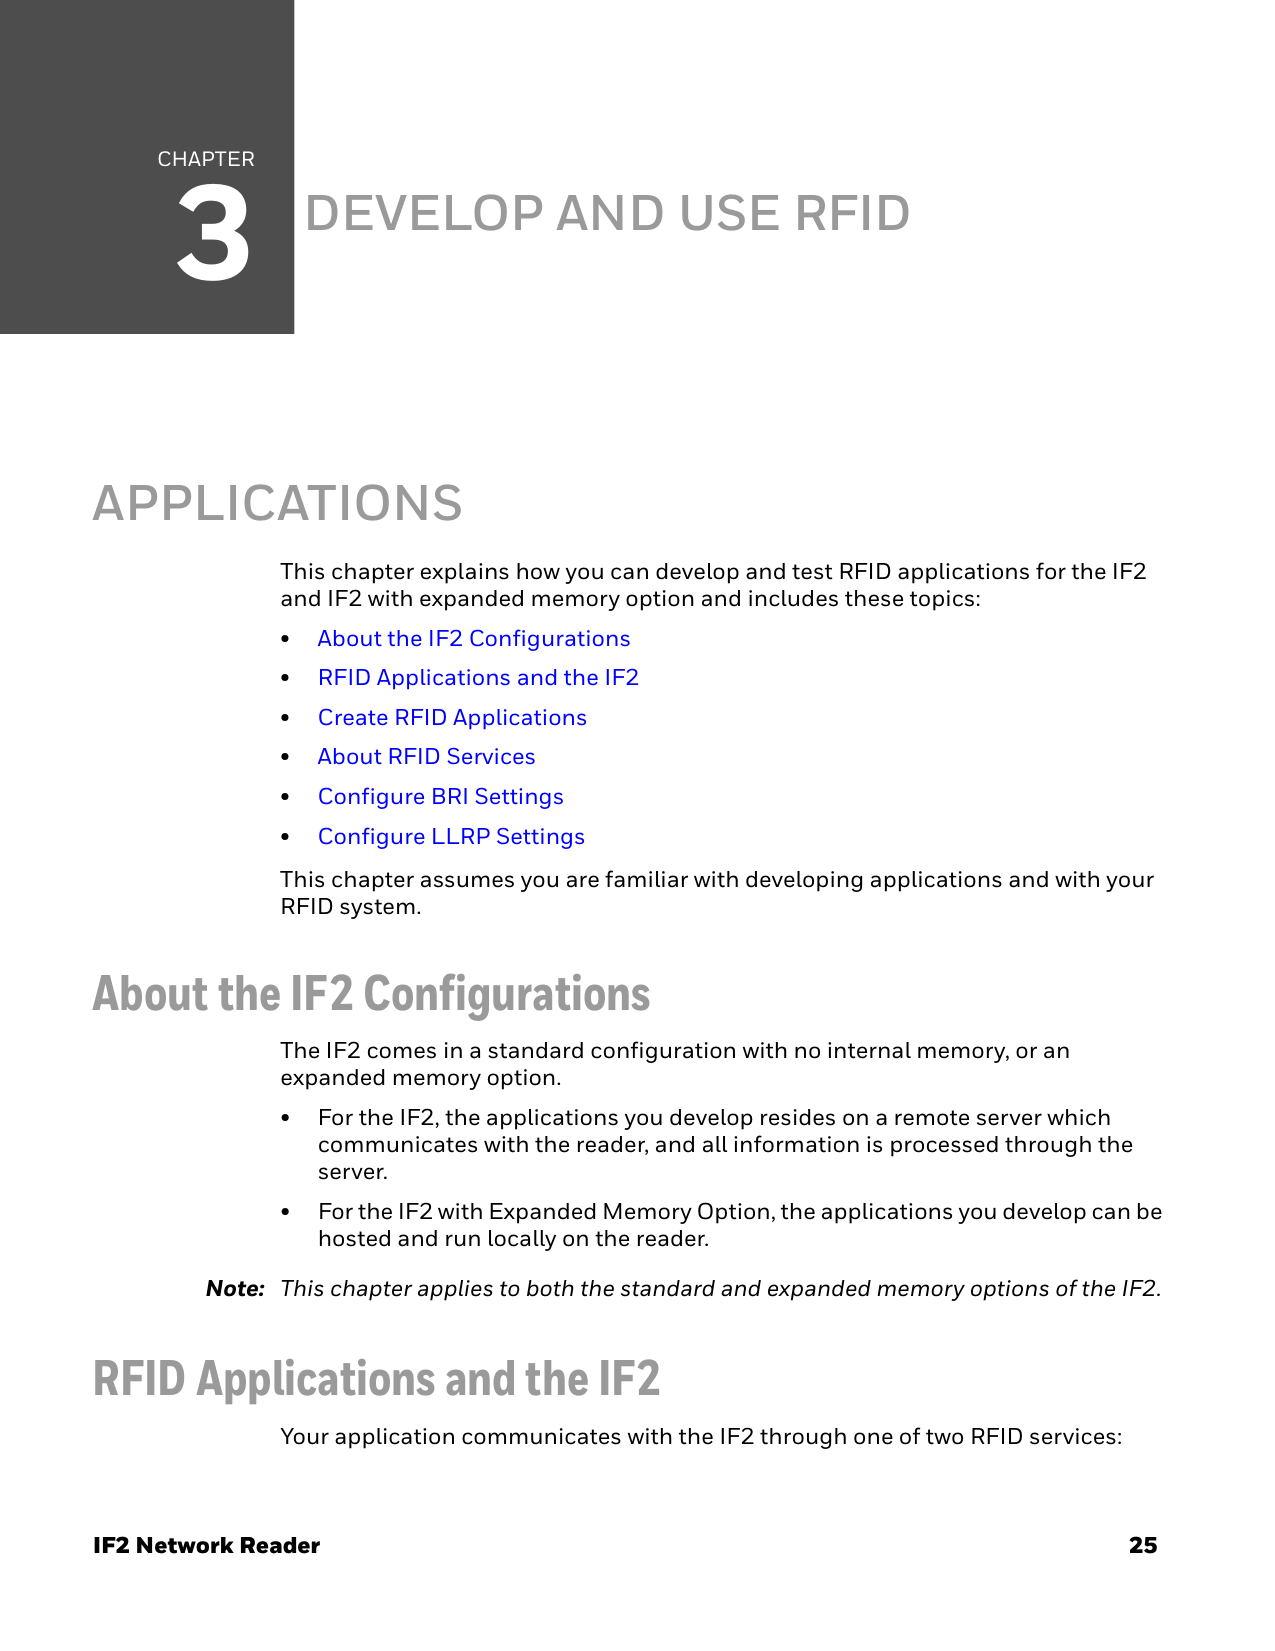 CHAPTER3IF2 Network Reader 25DEVELOP AND USE RFID APPLICATIONSThis chapter explains how you can develop and test RFID applications for the IF2 and IF2 with expanded memory option and includes these topics:•About the IF2 Configurations•RFID Applications and the IF2•Create RFID Applications•About RFID Services•Configure BRI Settings•Configure LLRP SettingsThis chapter assumes you are familiar with developing applications and with your RFID system.About the IF2 ConfigurationsThe IF2 comes in a standard configuration with no internal memory, or an expanded memory option.• For the IF2, the applications you develop resides on a remote server which communicates with the reader, and all information is processed through the server.• For the IF2 with Expanded Memory Option, the applications you develop can be hosted and run locally on the reader. Note: This chapter applies to both the standard and expanded memory options of the IF2.RFID Applications and the IF2Your application communicates with the IF2 through one of two RFID services: